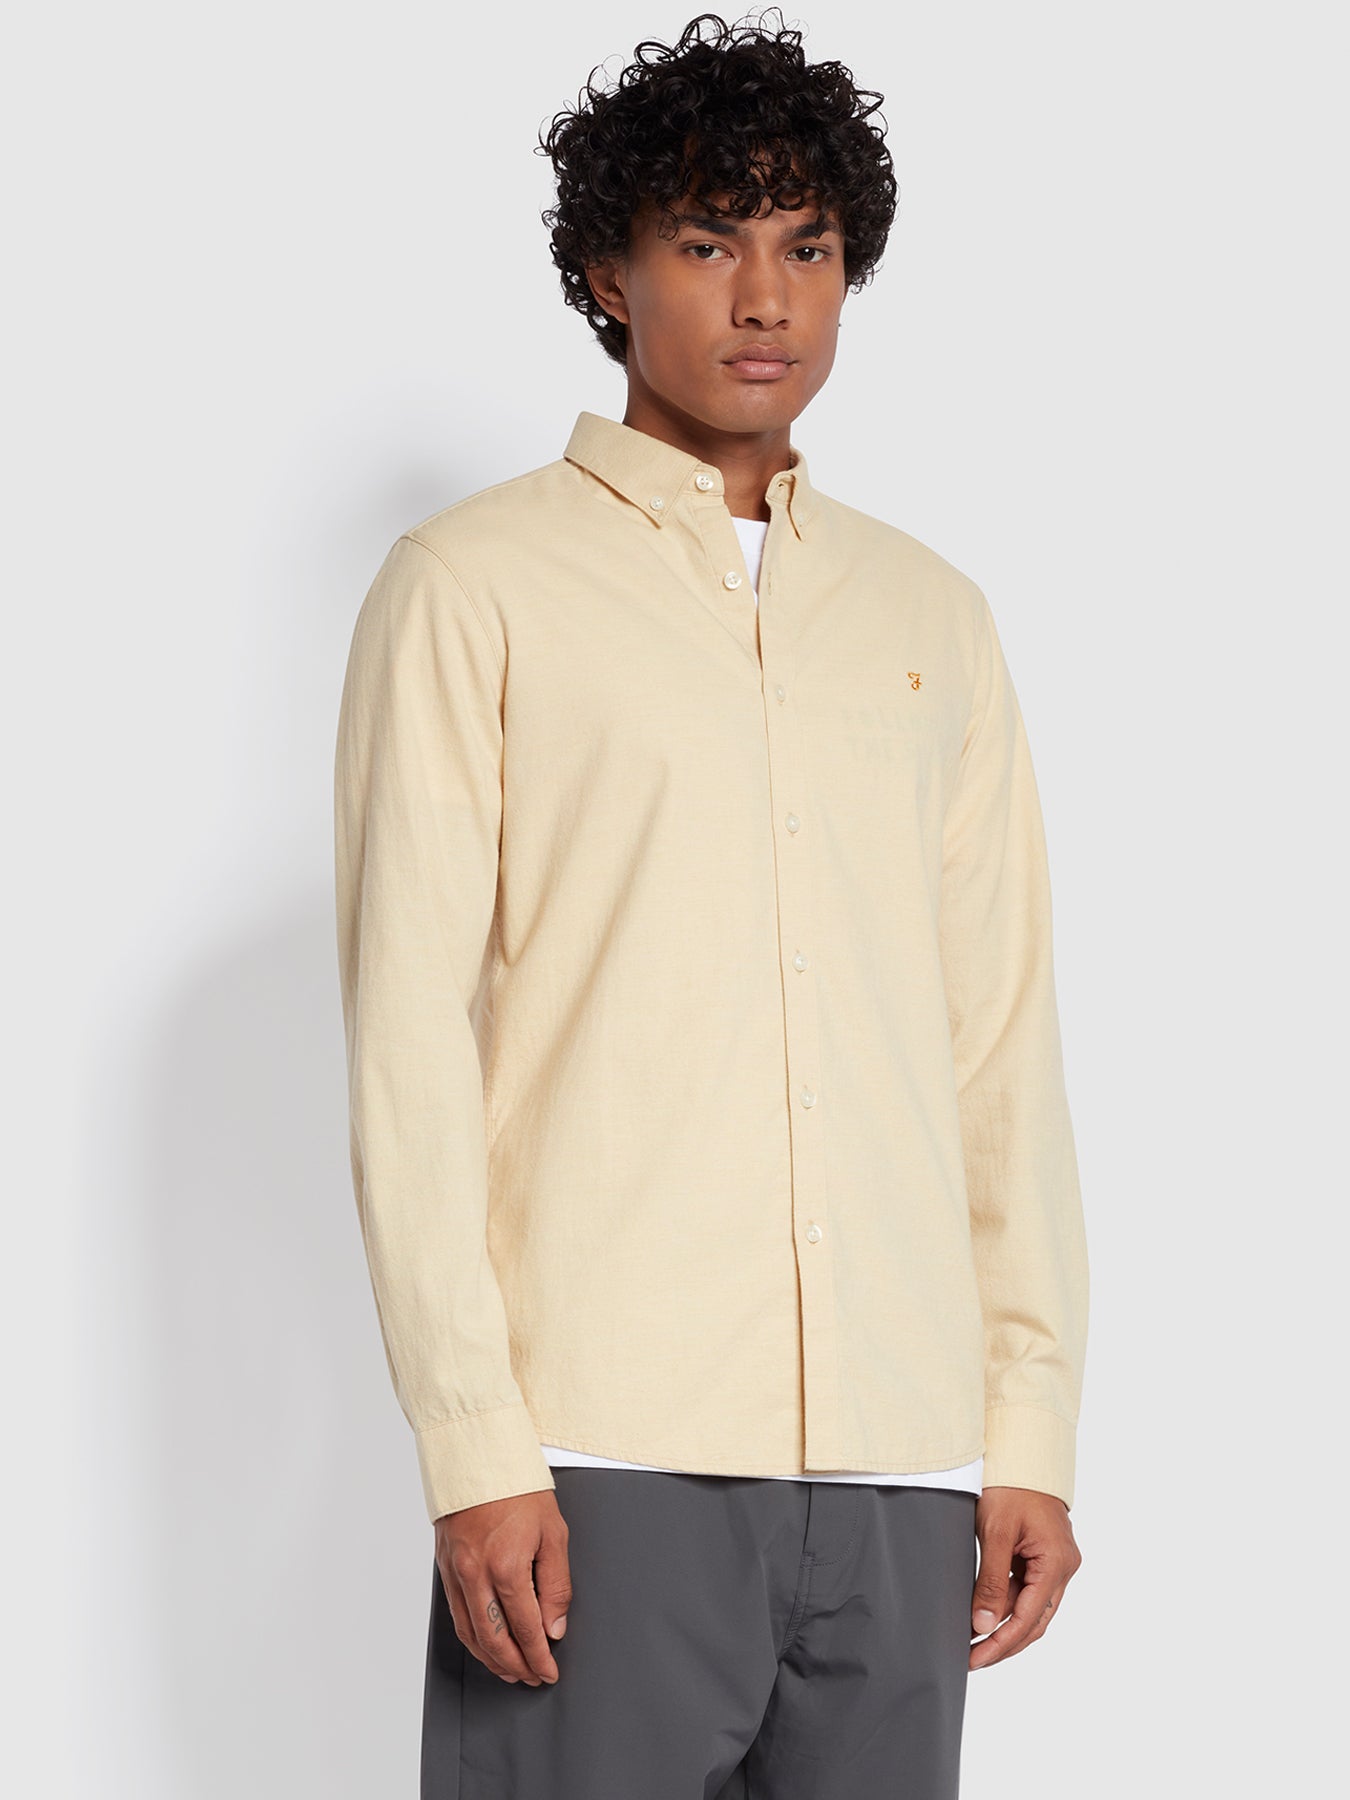 View Steen Slim Fit Long Sleeve Brushed Shirt In Peach information